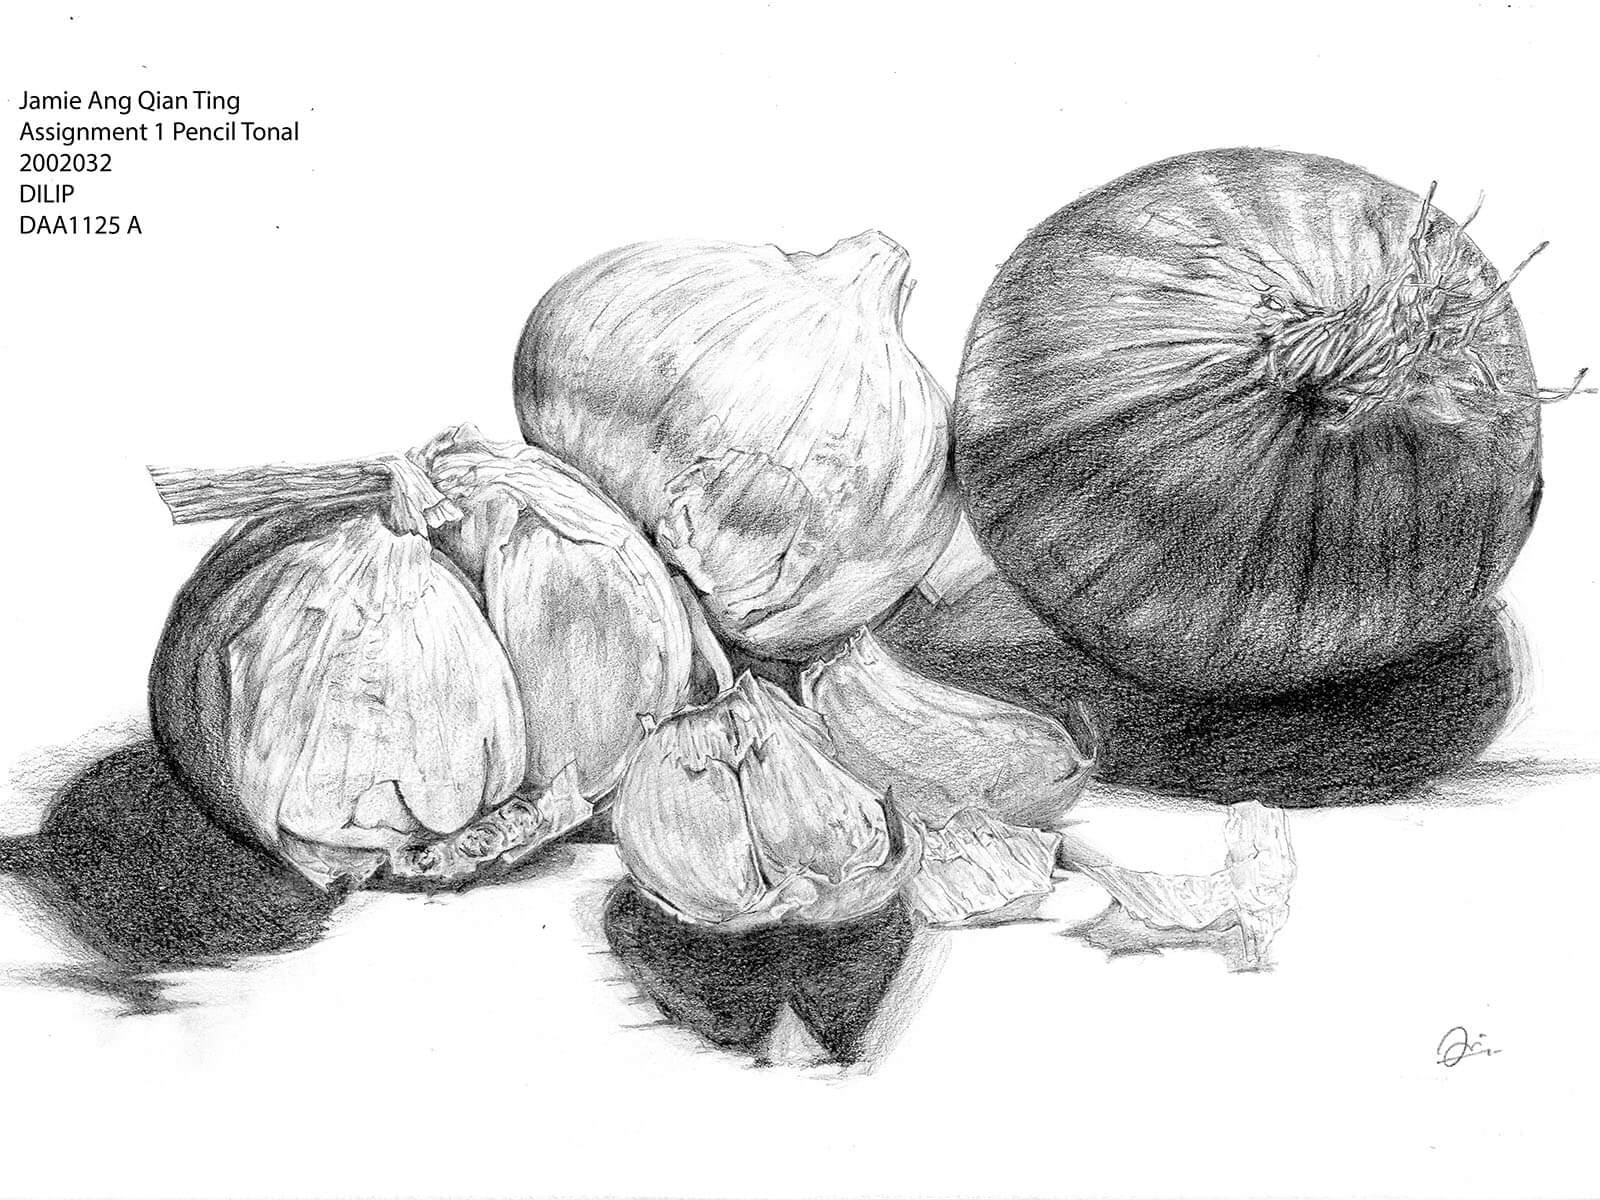 Black-and-White sketch of an onion and two bulbs of garlic.